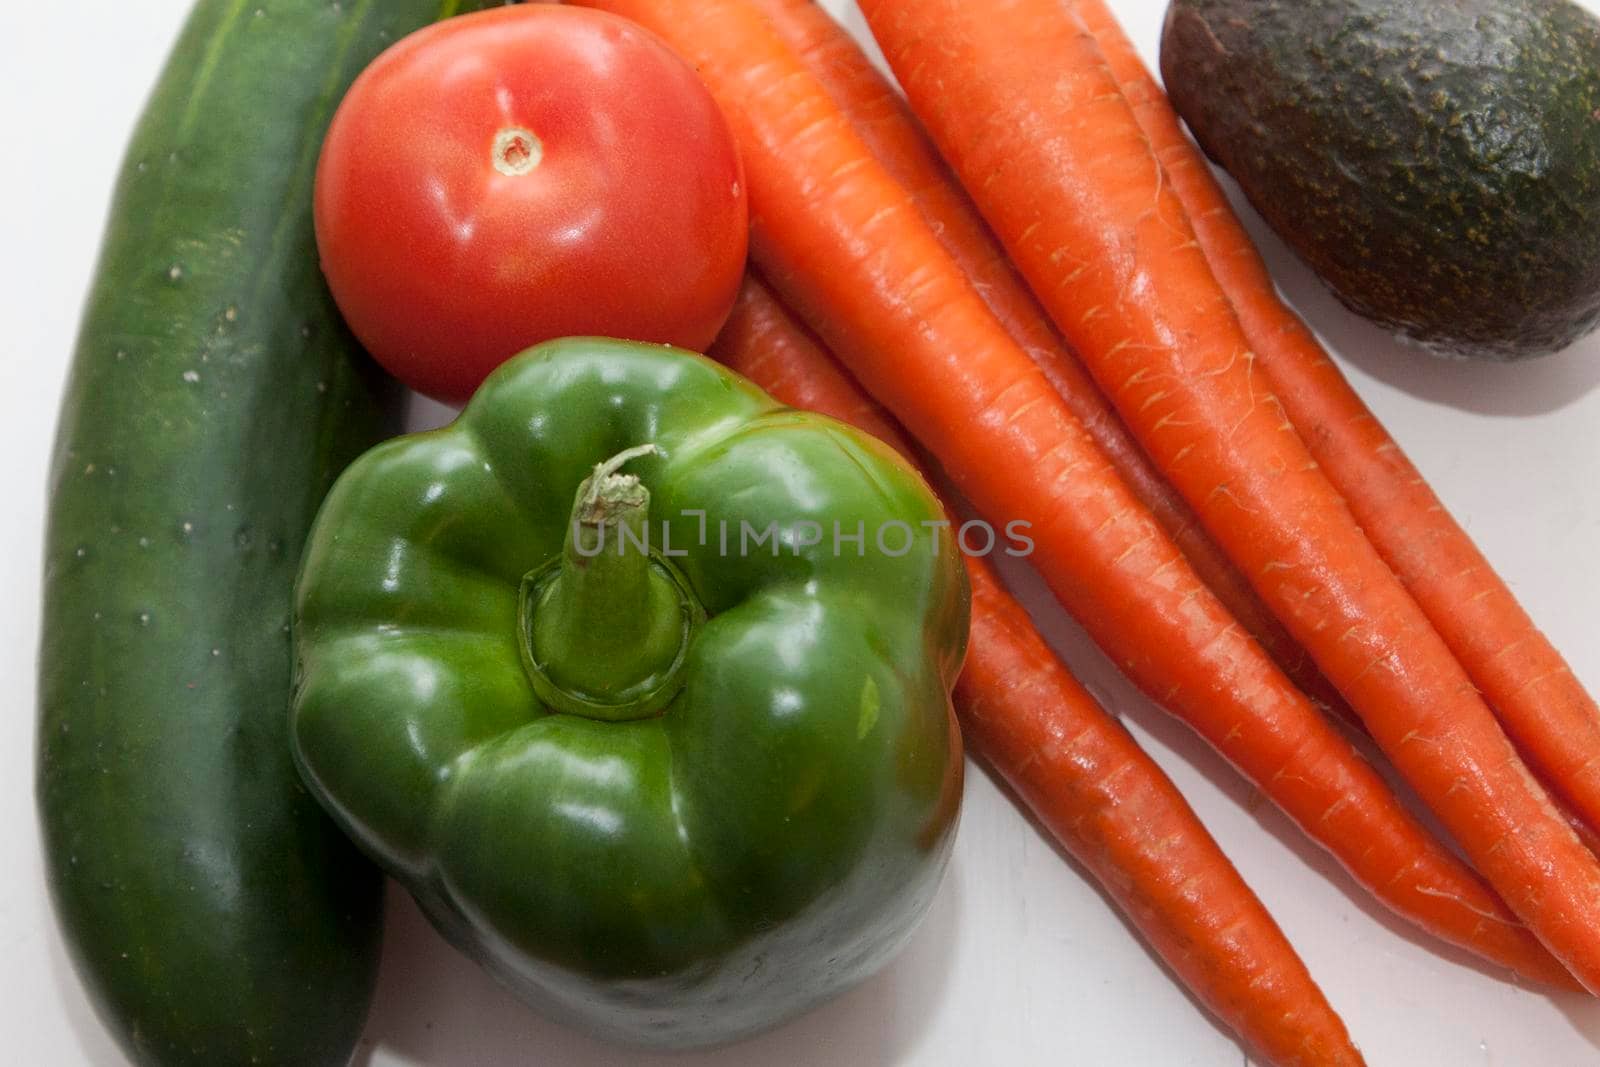  beautiful fresh produce vegetables ready to eat